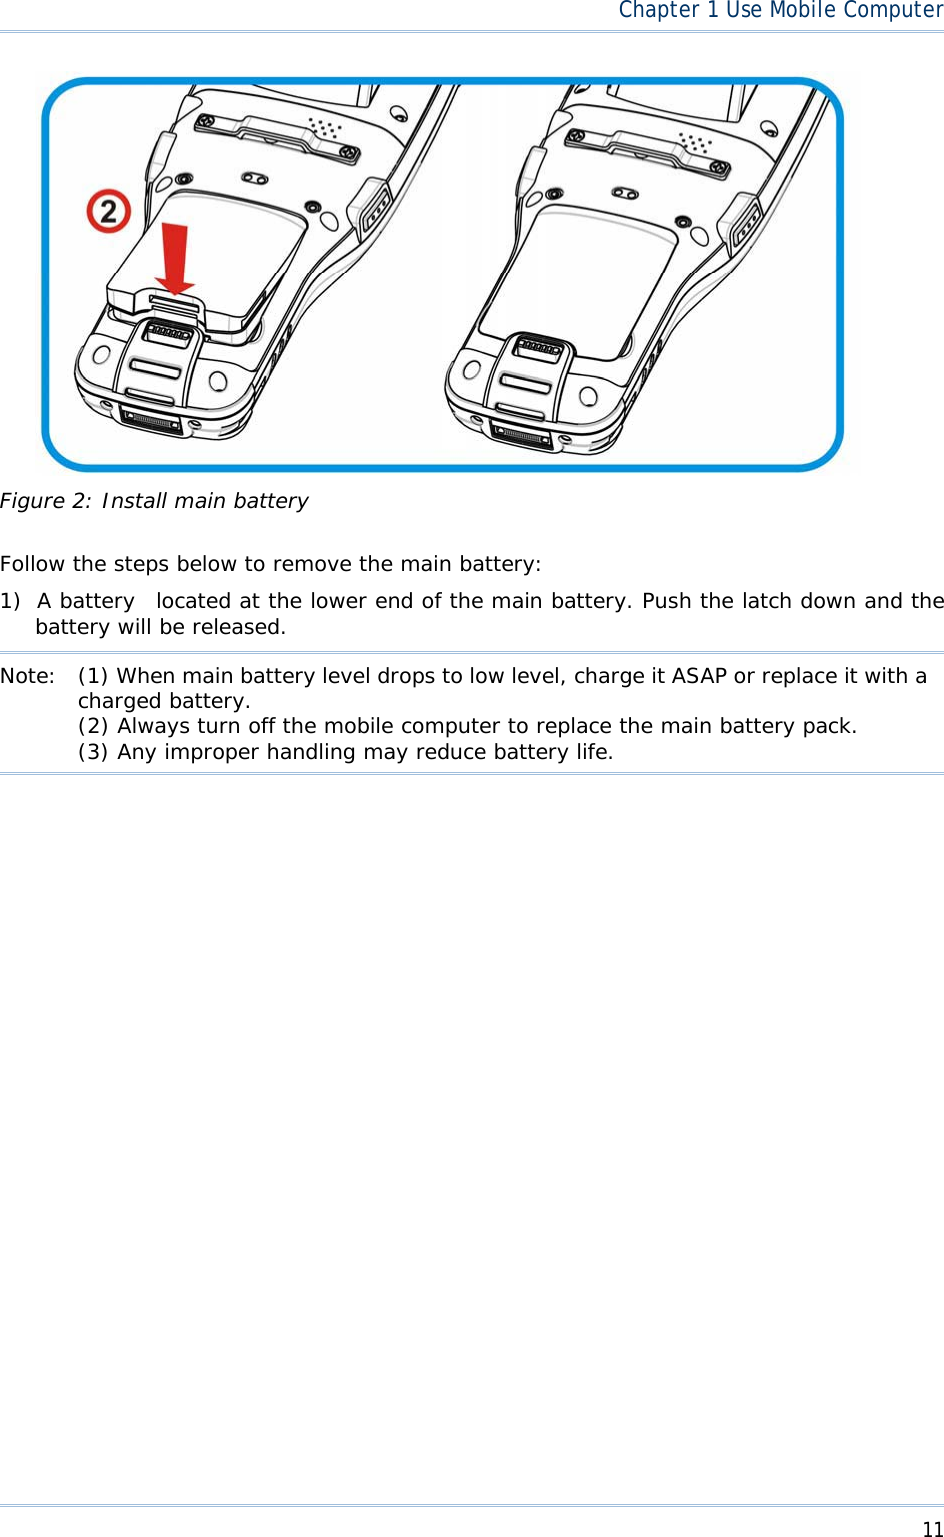  11Chapter1 Use Mobile ComputerFigure 2: Install main battery Follow the steps below to remove the main battery: 1) A battery  located at the lower end of the main battery. Push the latch down and the battery will be released.  Note:  (1) When main battery level drops to low level, charge it ASAP or replace it with acharged battery. (2) Always turn off the mobile computer to replace the main battery pack. (3) Any improper handling may reduce battery life. 